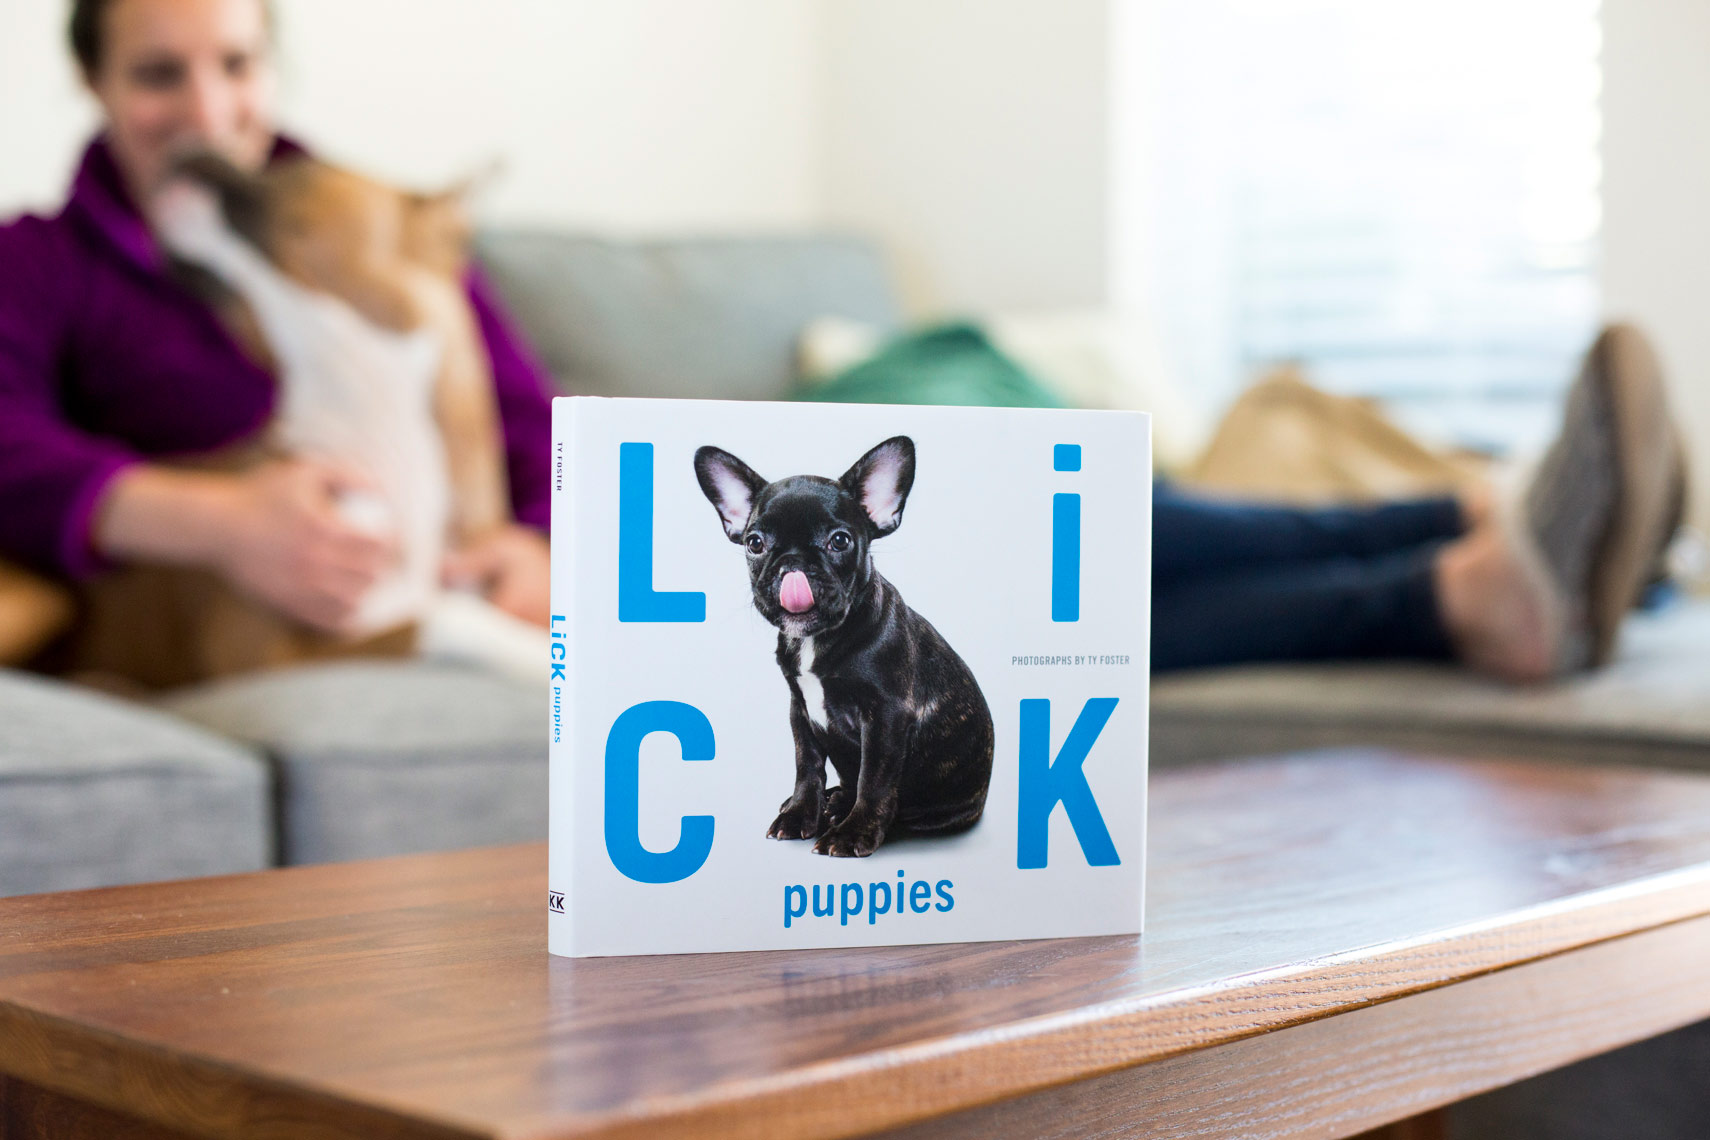 A happy girl and her dog with a LICK puppies book on their coffee table